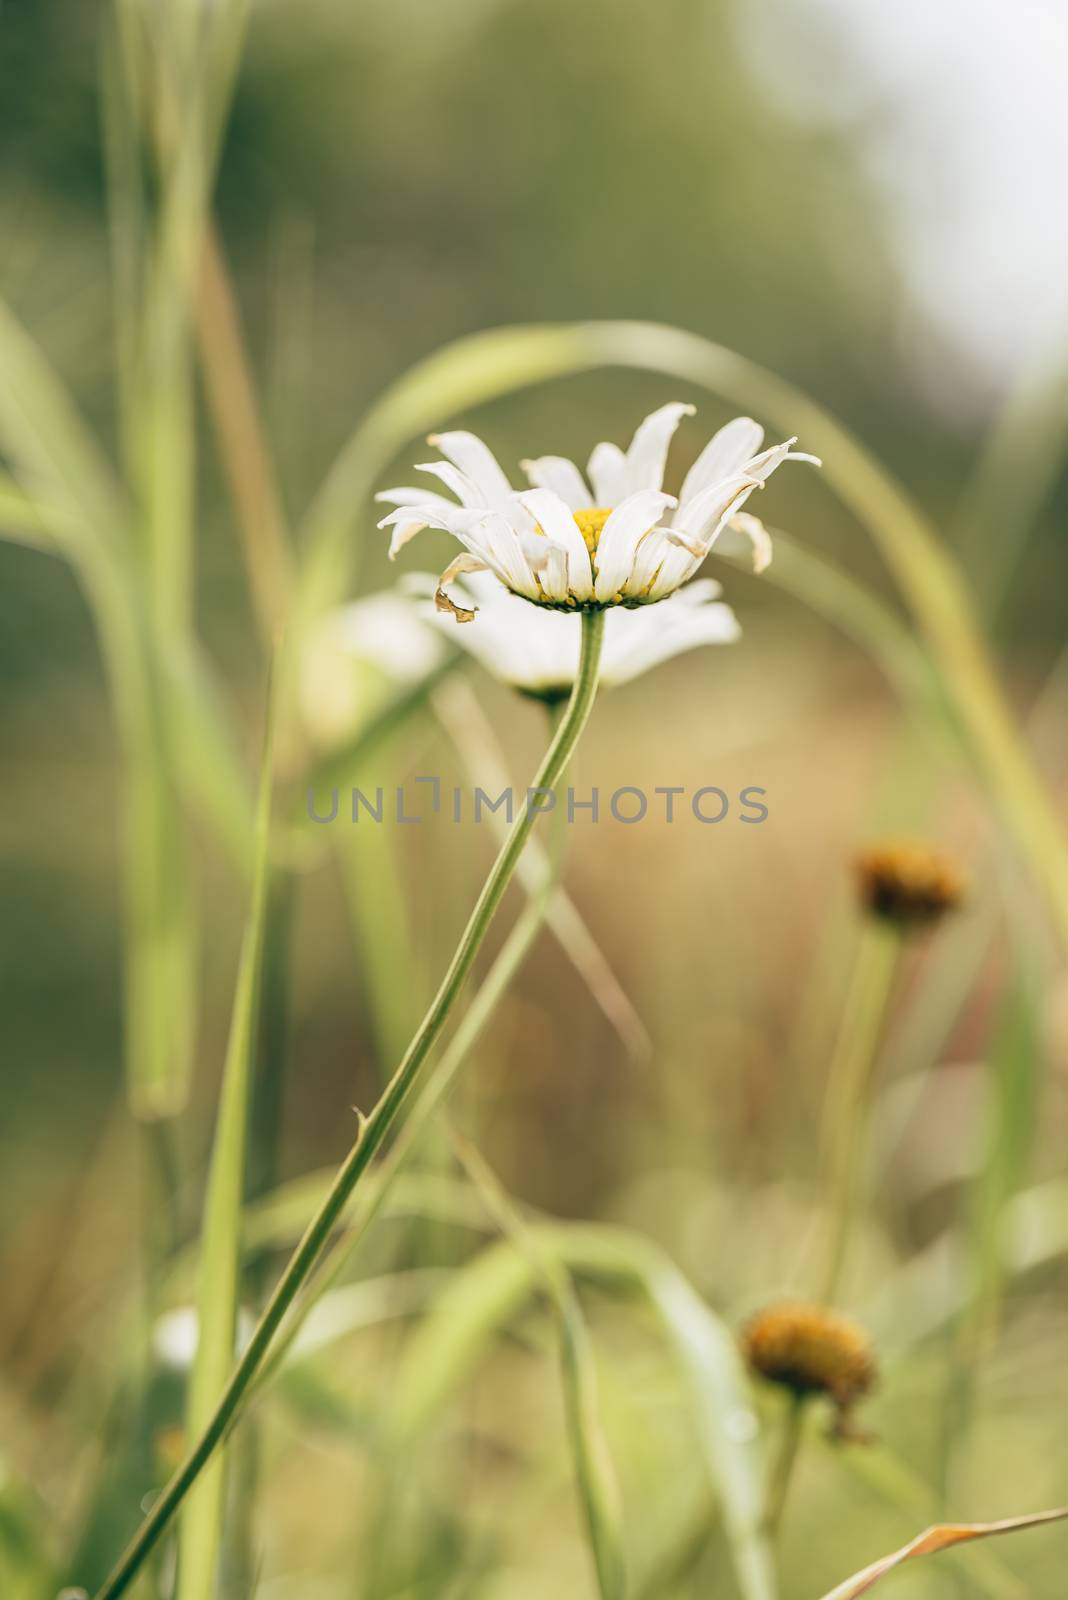 Meadow Daisy Flower at Sunny Day on Blurred Background.